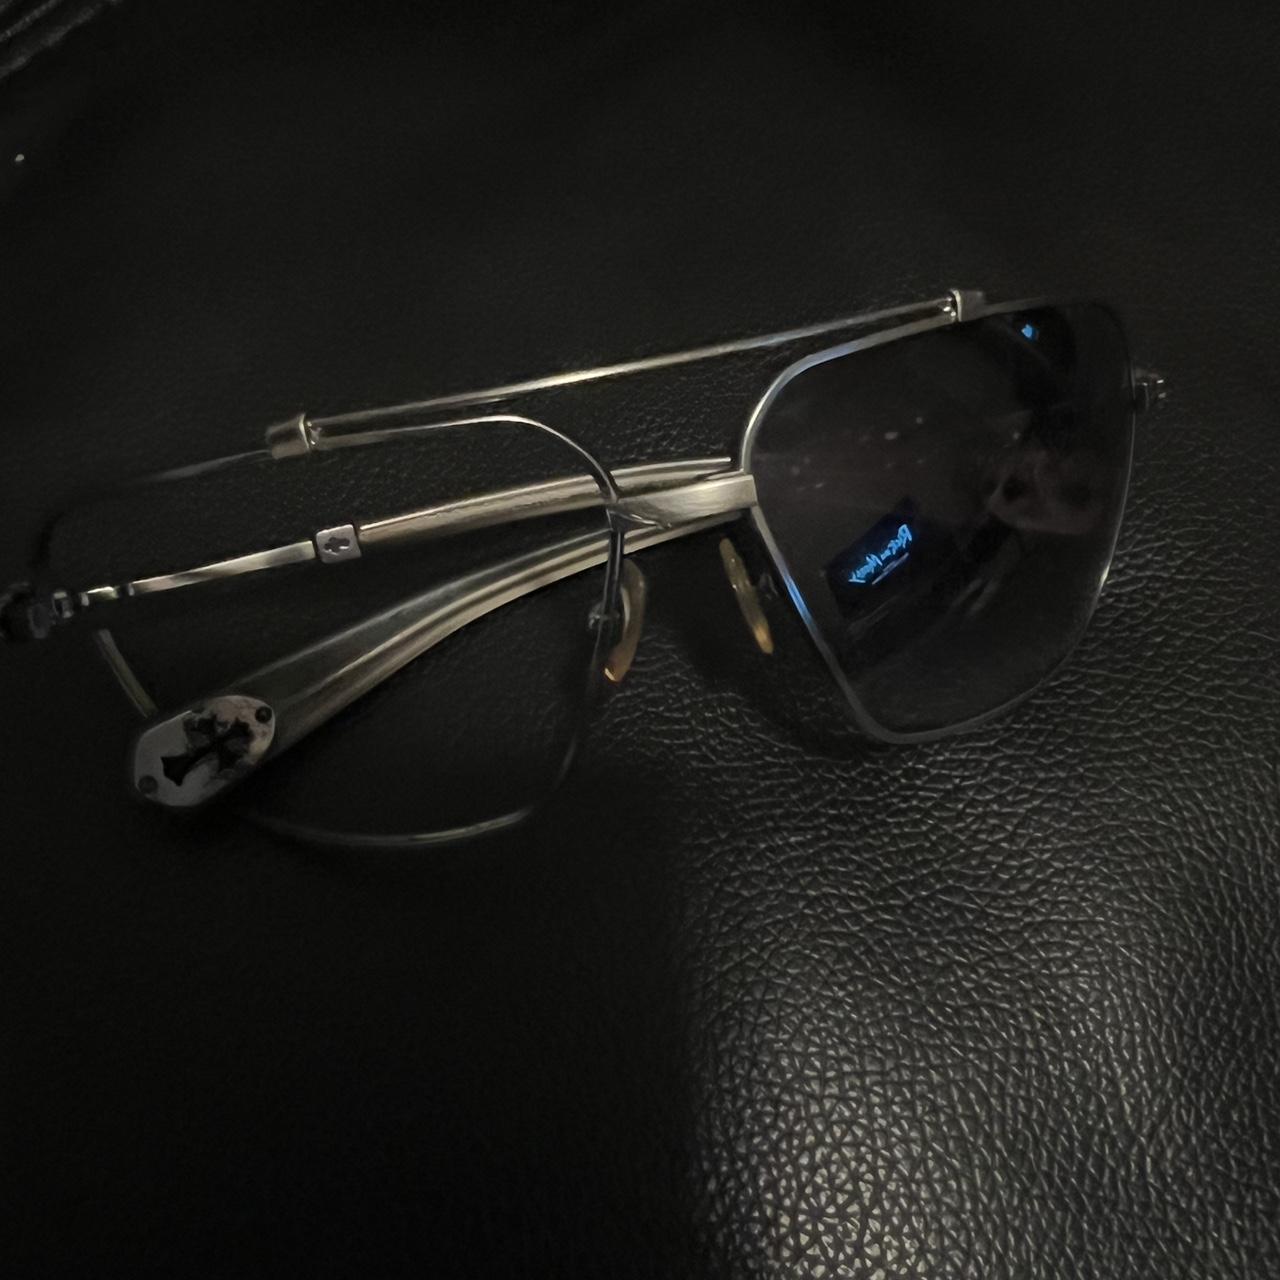 Chrome Hearts Store Leather Sunglasses Display - Depop